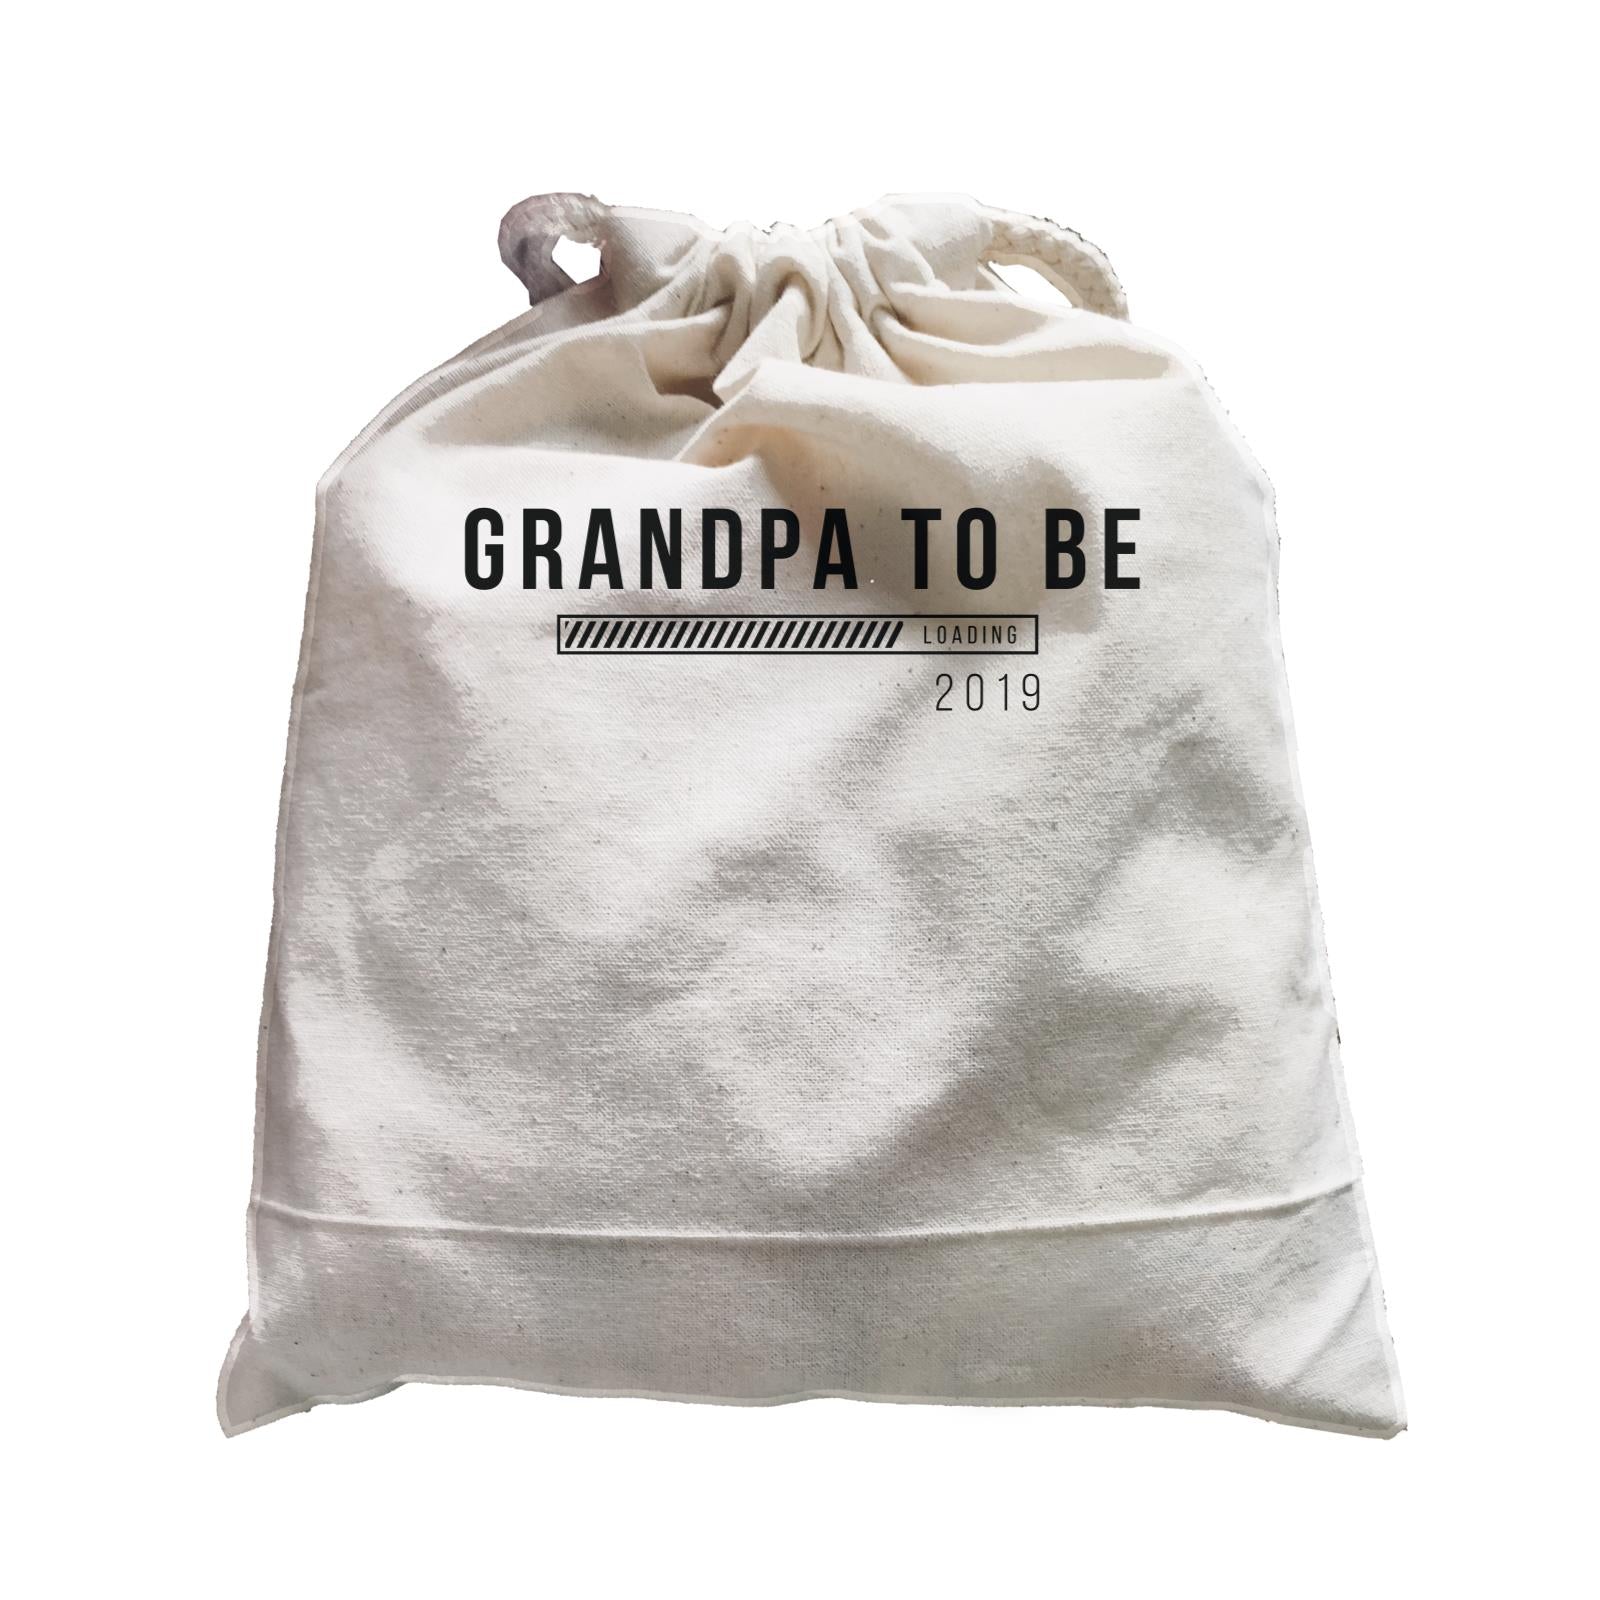 Coming Soon Family Grandpa To Be Loading Add Date Satchel